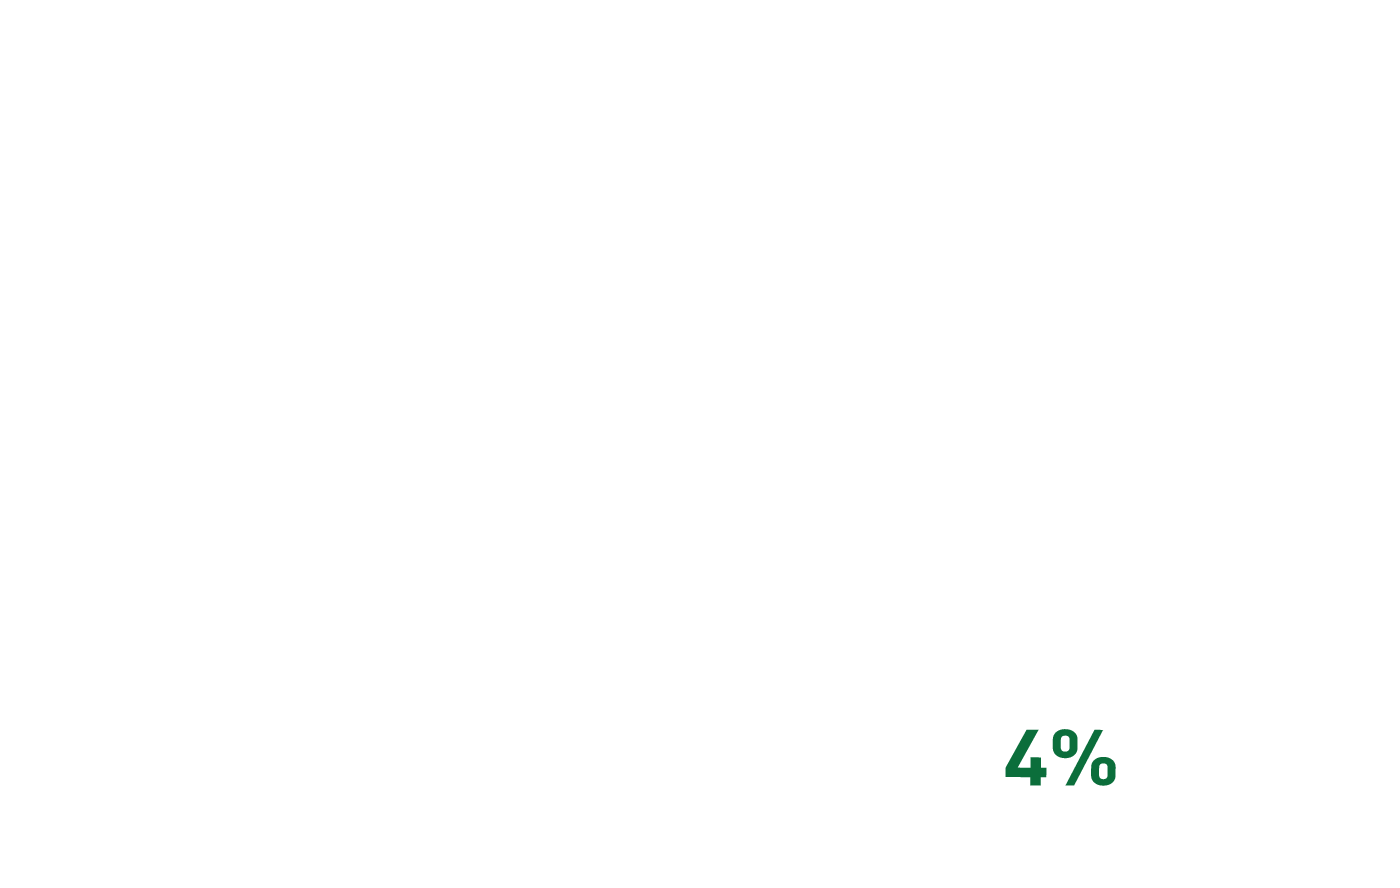 SWACO handled 45,256 tons more waste in 2021